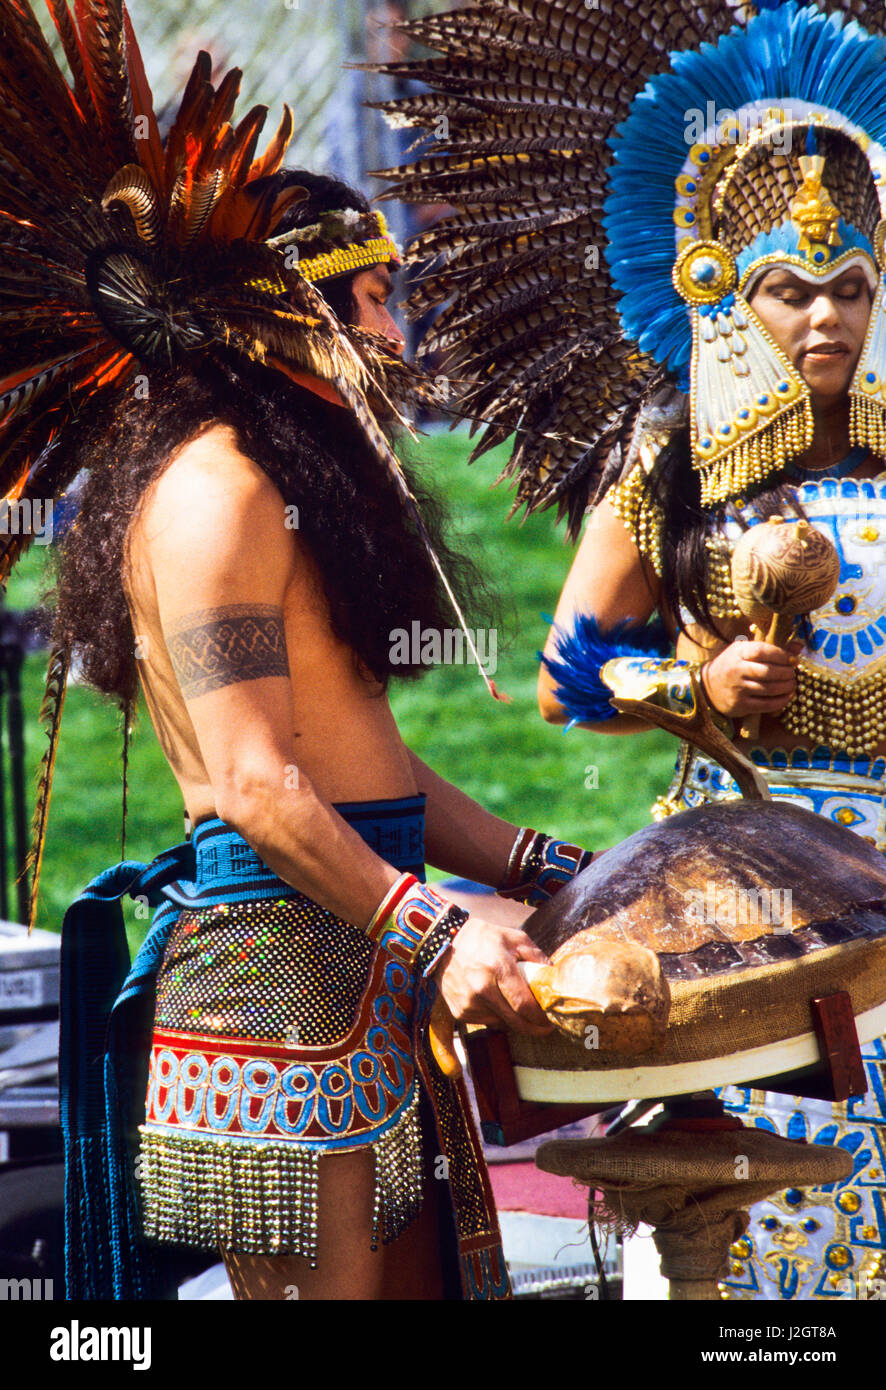 Aztec man dressed in traditional regalia plays a large turtle shell drum and a woman also dressed in ceremonial clothing and large feather headdress shakes a gourd rattle during a celebration of Aztec songs and dance. Stock Photo